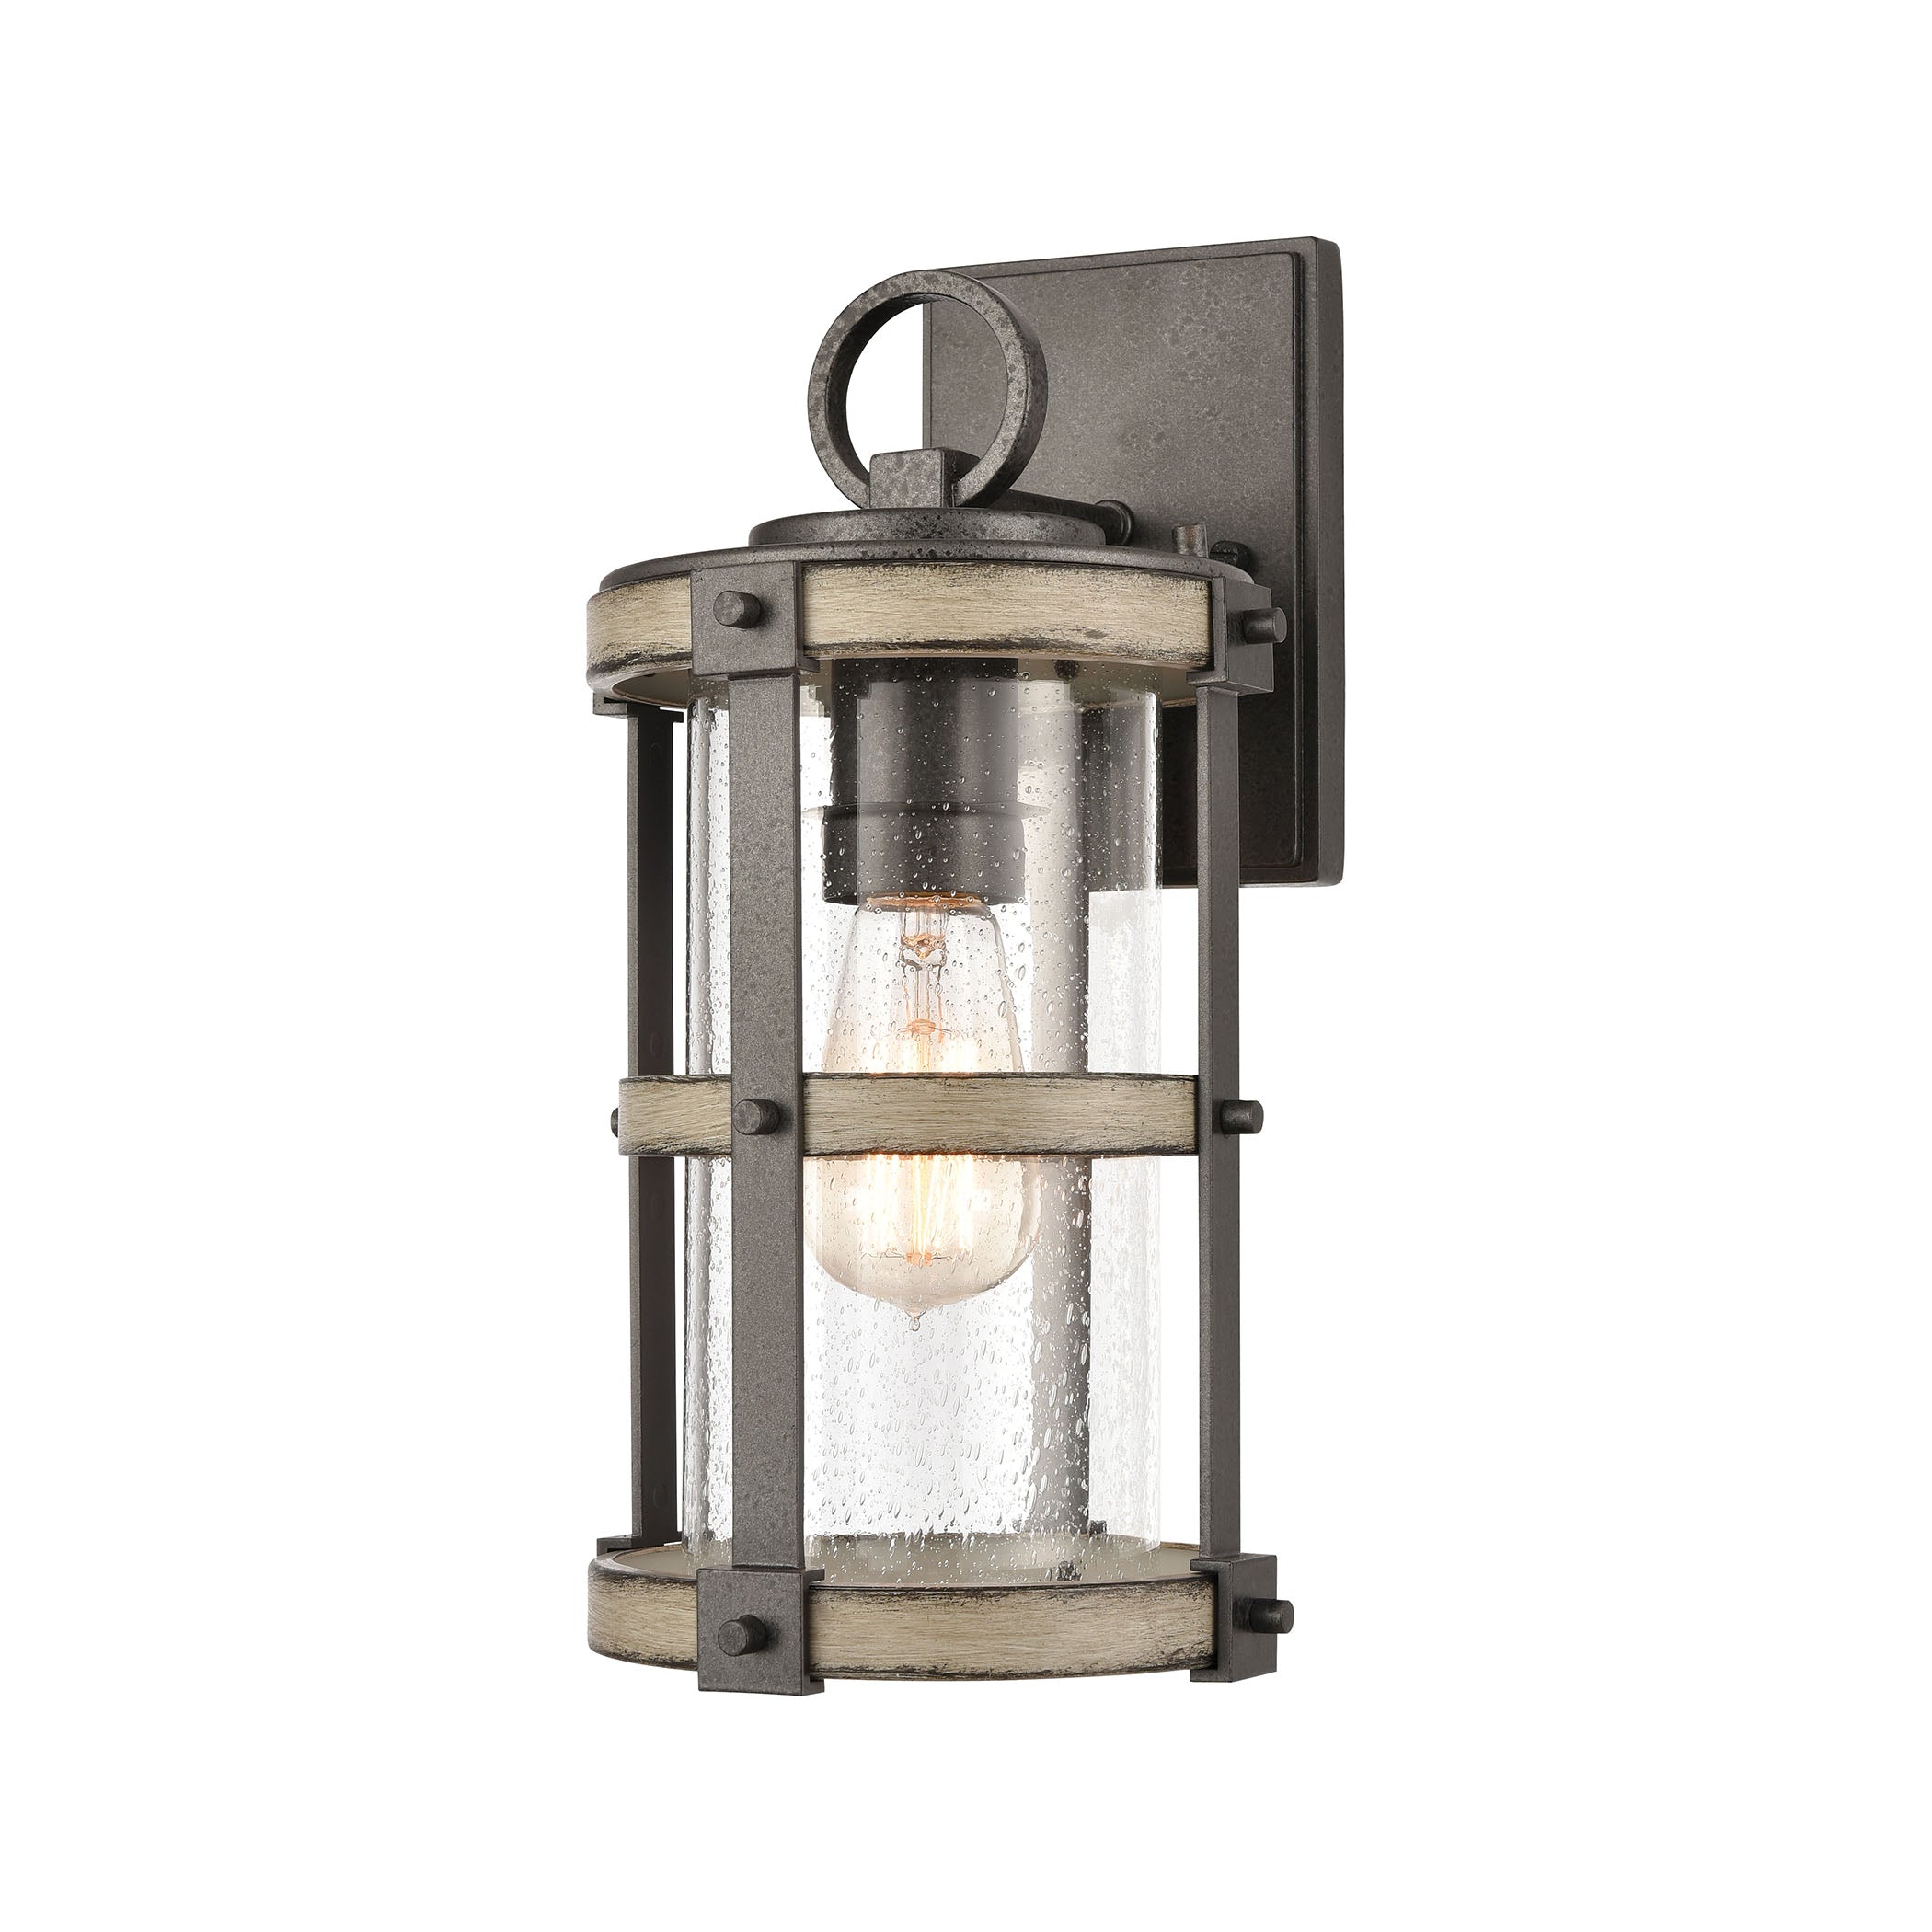 ELK Lighting 89144/1 Crenshaw 1-Light Outdoor Sconce in Anvil Iron and Distressed Antique Graywood with Seedy Glass